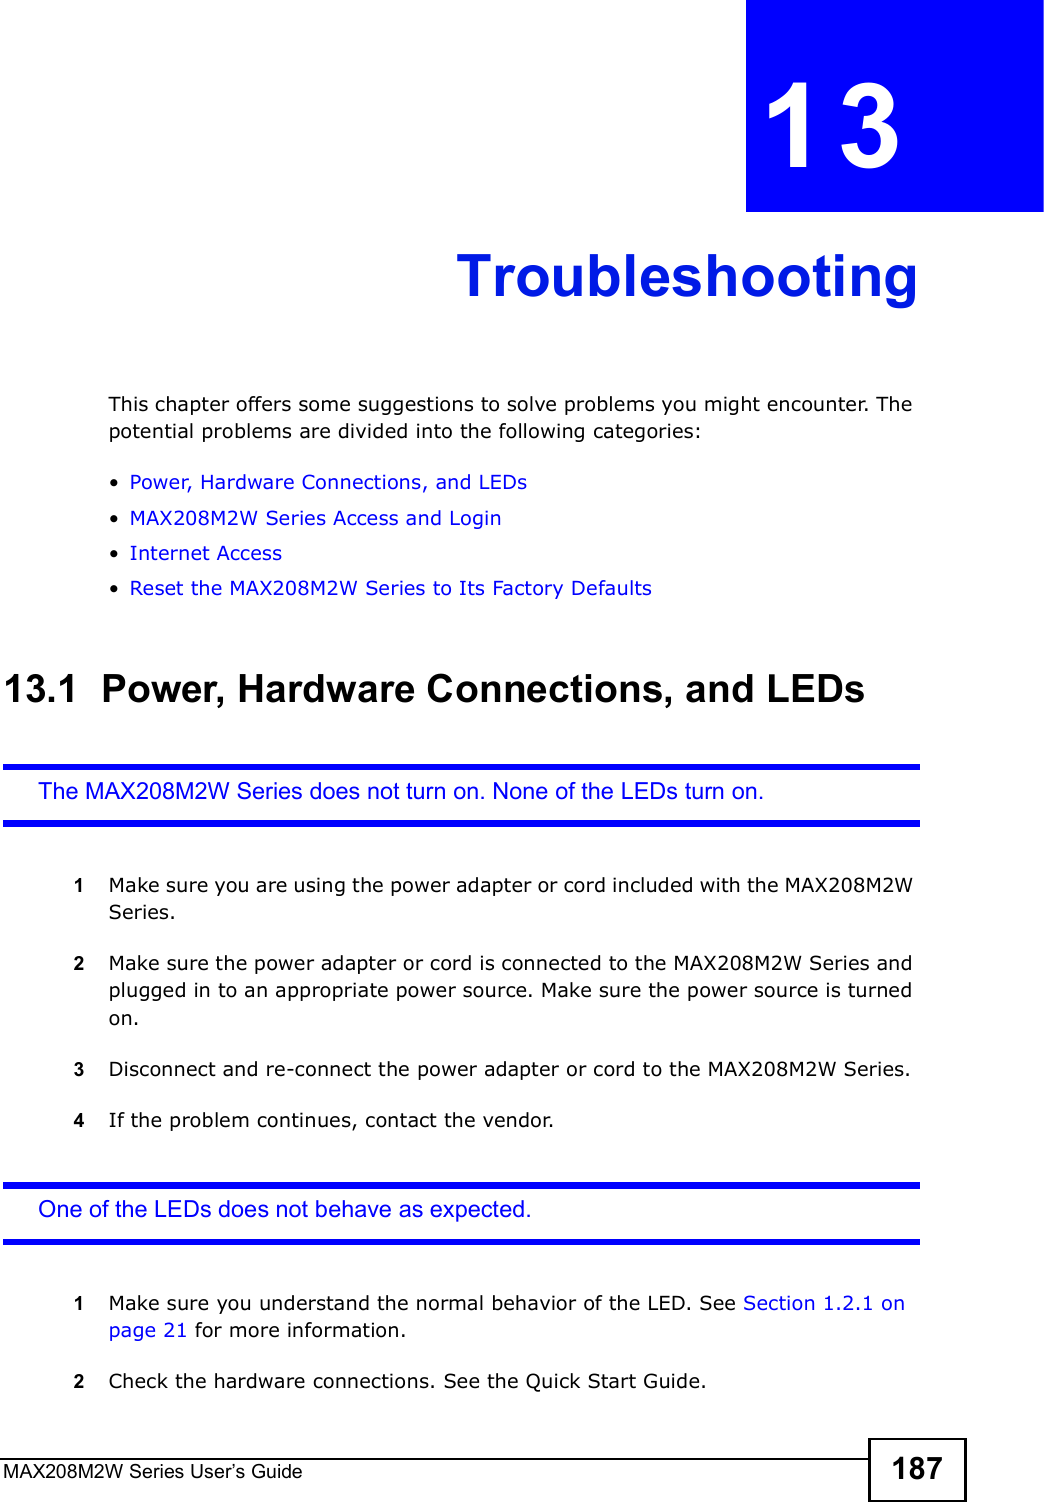 MAX208M2W Series User s Guide 187CHAPTER  13 TroubleshootingThis chapter offers some suggestions to solve problems you might encounter. The potential problems are divided into the following categories:!Power, Hardware Connections, and LEDs!MAX208M2W Series Access and Login!Internet Access!Reset the MAX208M2W Series to Its Factory Defaults13.1  Power, Hardware Connections, and LEDsThe MAX208M2W Series does not turn on. None of the LEDs turn on.1Make sure you are using the power adapter or cord included with the MAX208M2W Series.2Make sure the power adapter or cord is connected to the MAX208M2W Series and plugged in to an appropriate power source. Make sure the power source is turned on.3Disconnect and re-connect the power adapter or cord to the MAX208M2W Series.4If the problem continues, contact the vendor.One of the LEDs does not behave as expected.1Make sure you understand the normal behavior of the LED. See Section 1.2.1 on page 21 for more information.2Check the hardware connections. See the Quick Start Guide.